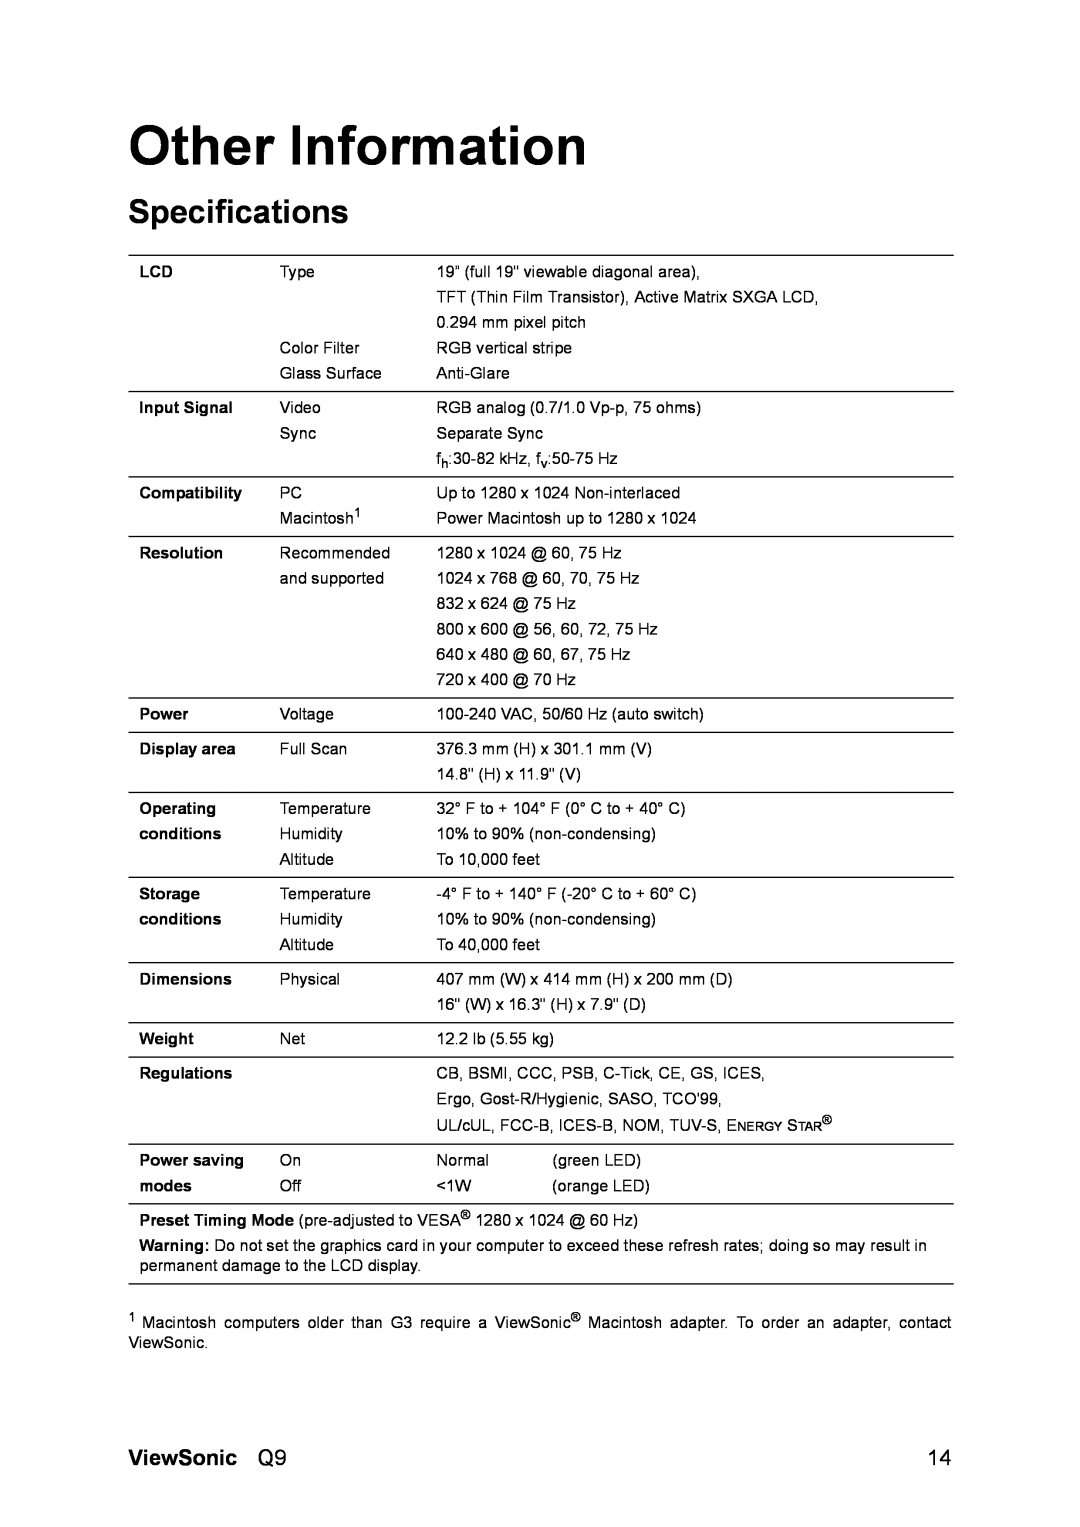 ViewSonic Q9B manual Other Information, Specifications, ViewSonic Q9 